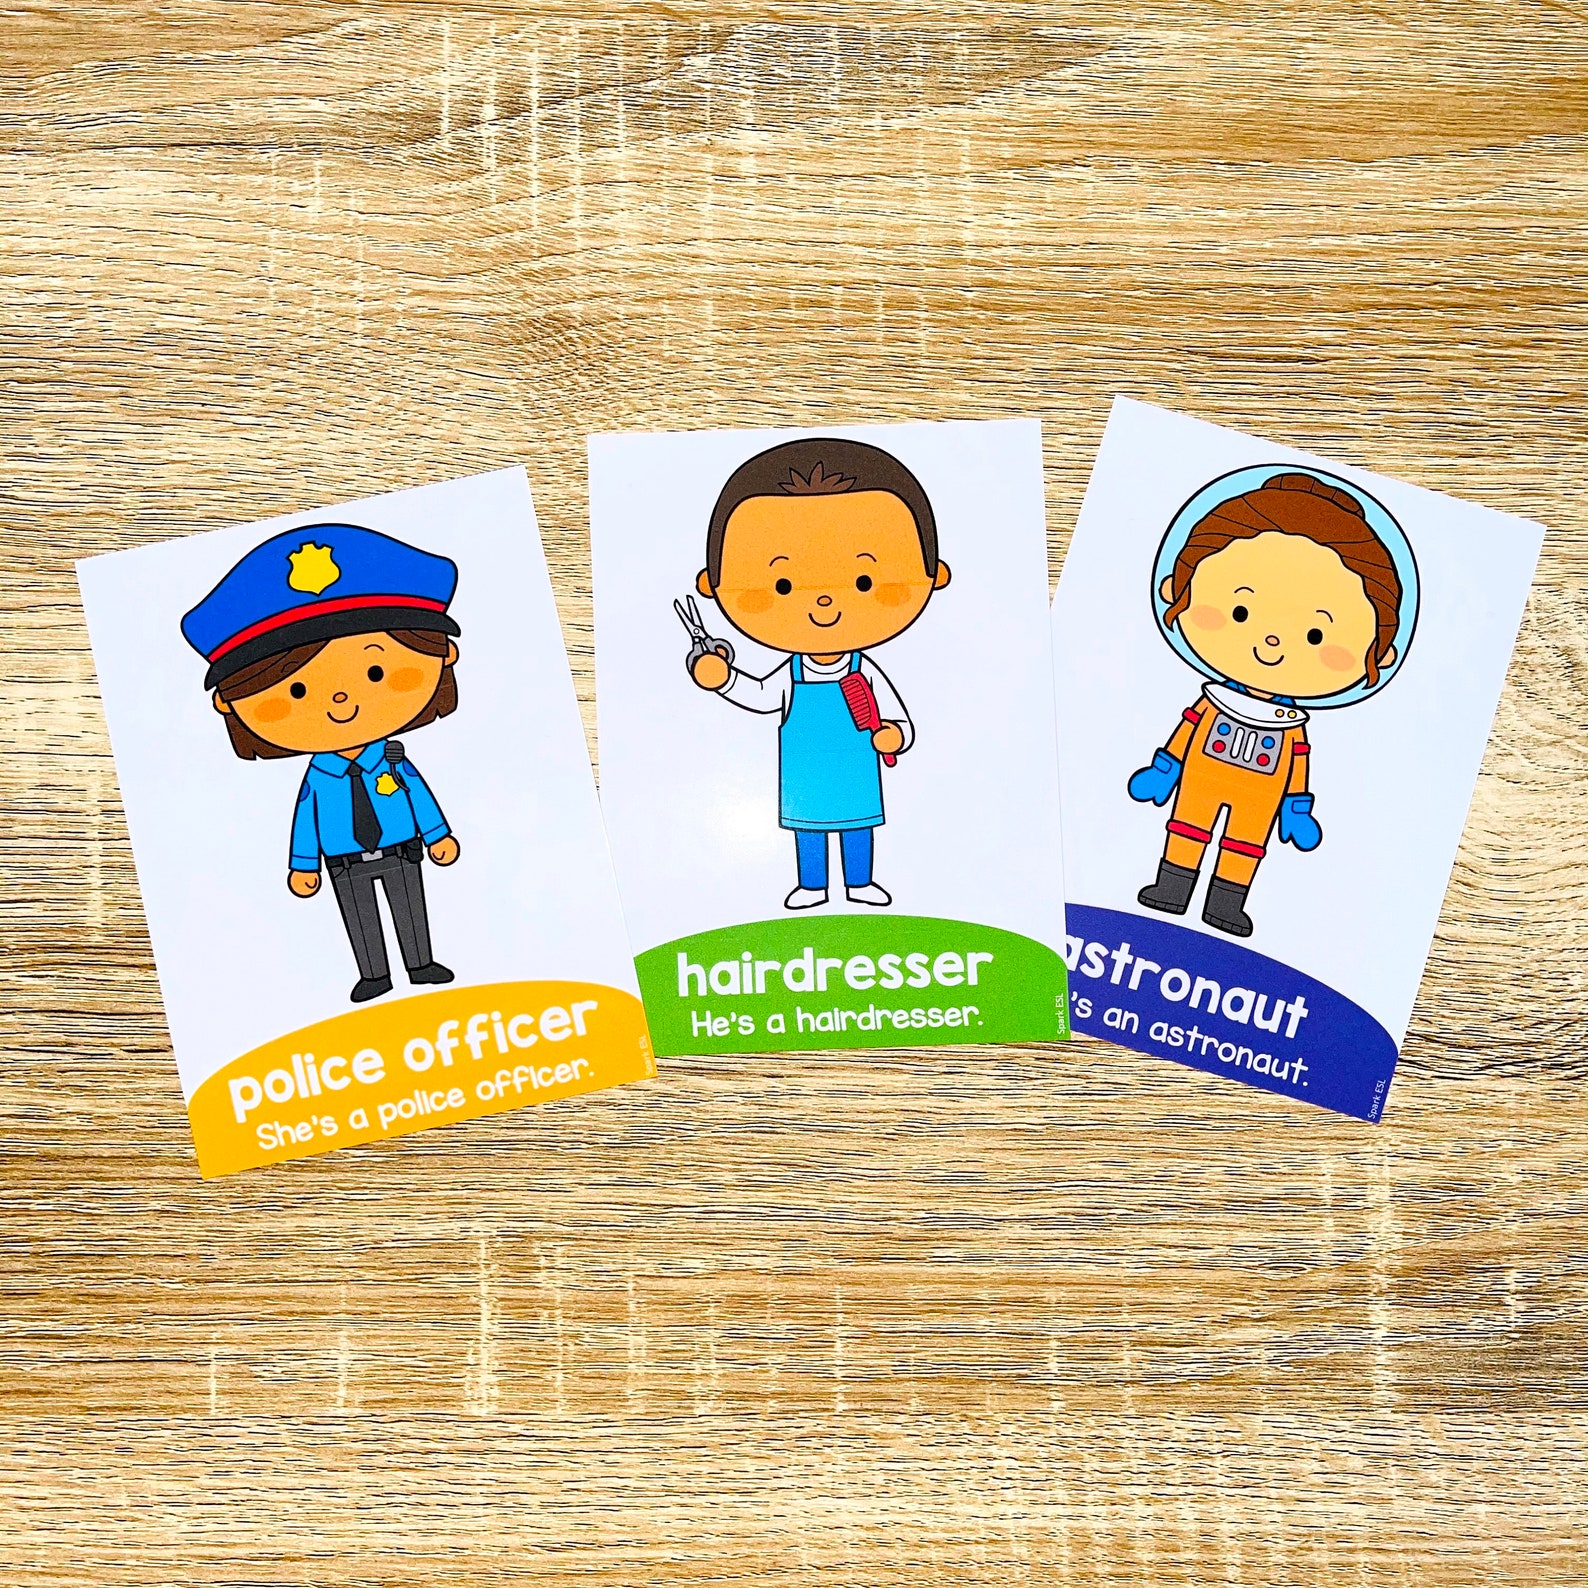 Jobs Flashcards For Kids Printable Occupations Flashcards Great For